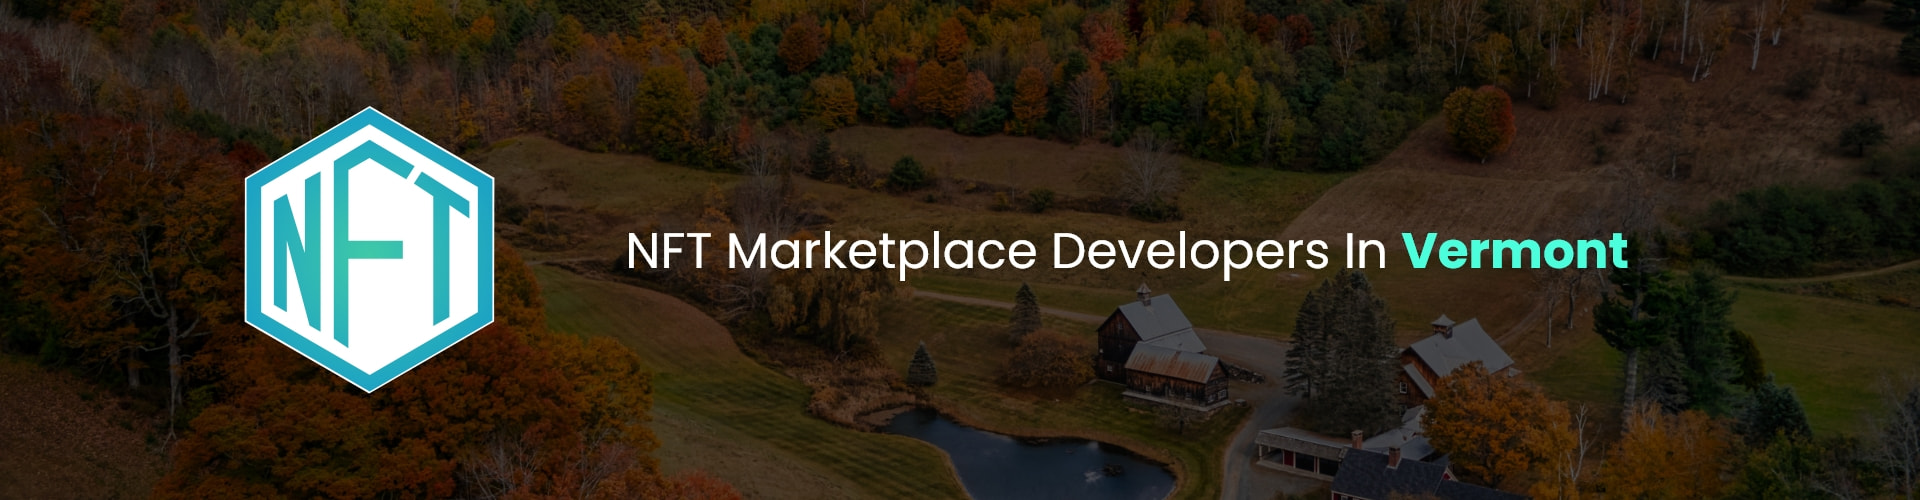 hire nft marketplace developers in vermont